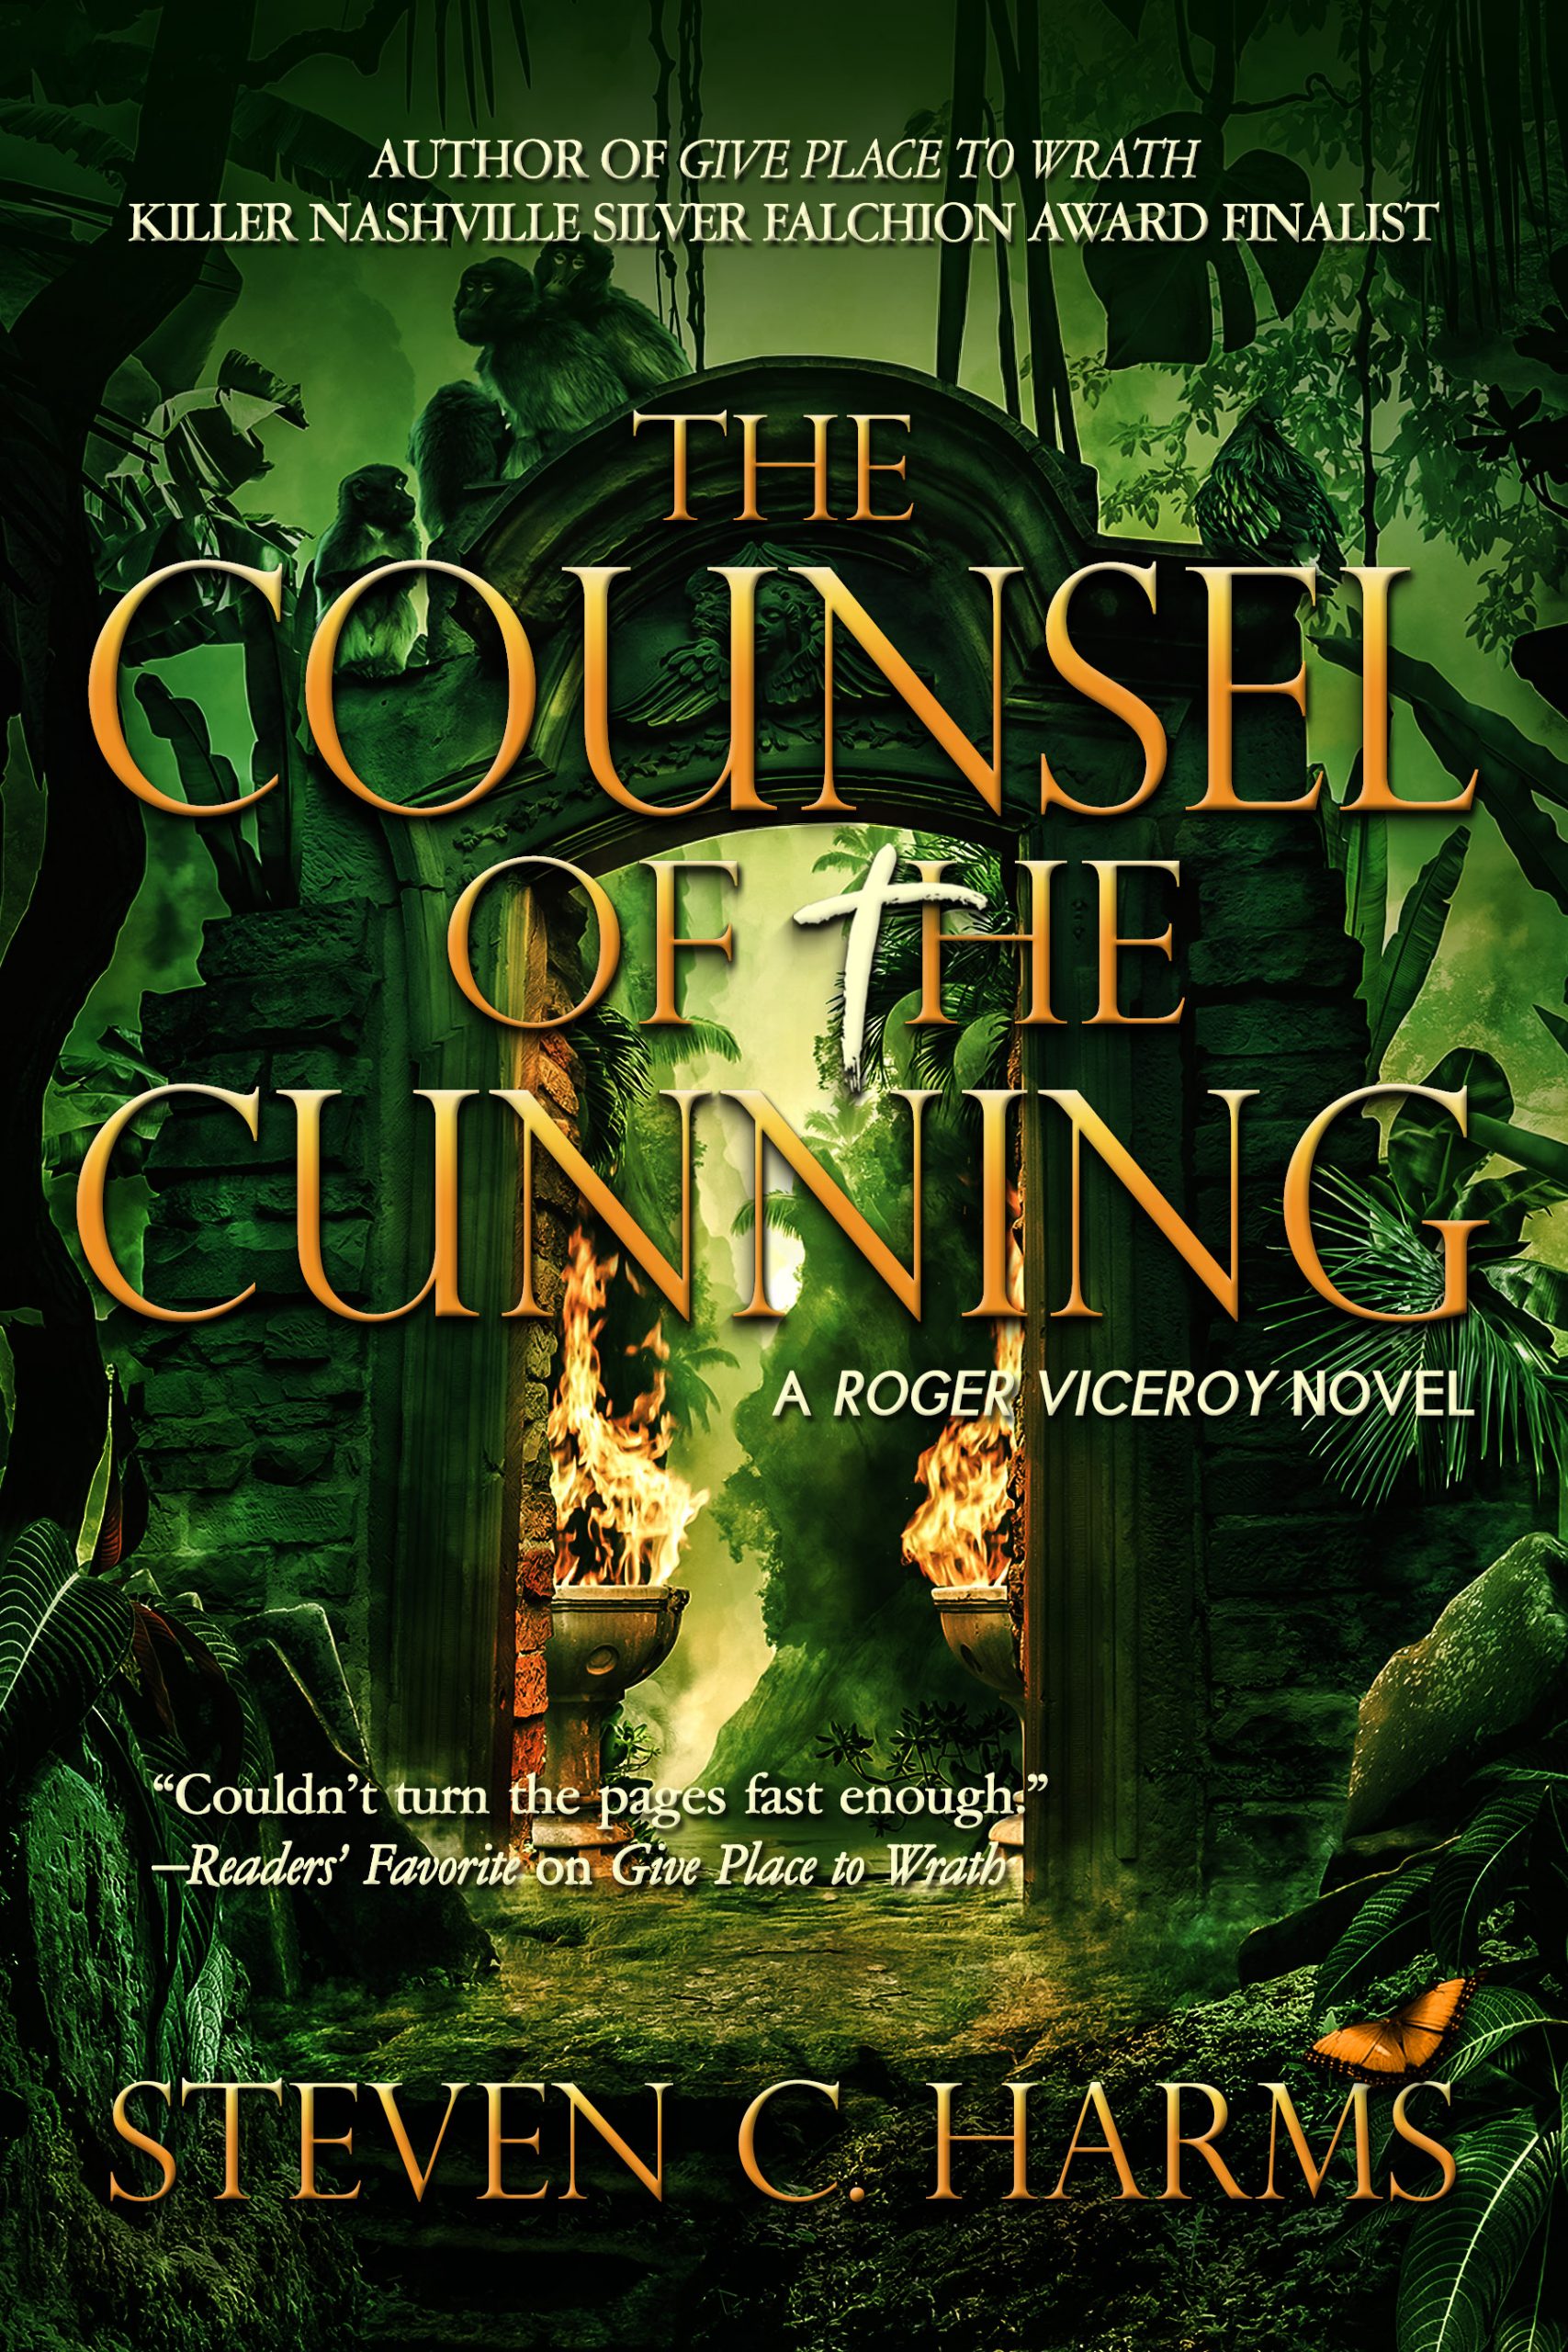 The Counsel of the Cunning by Steven C. Harms